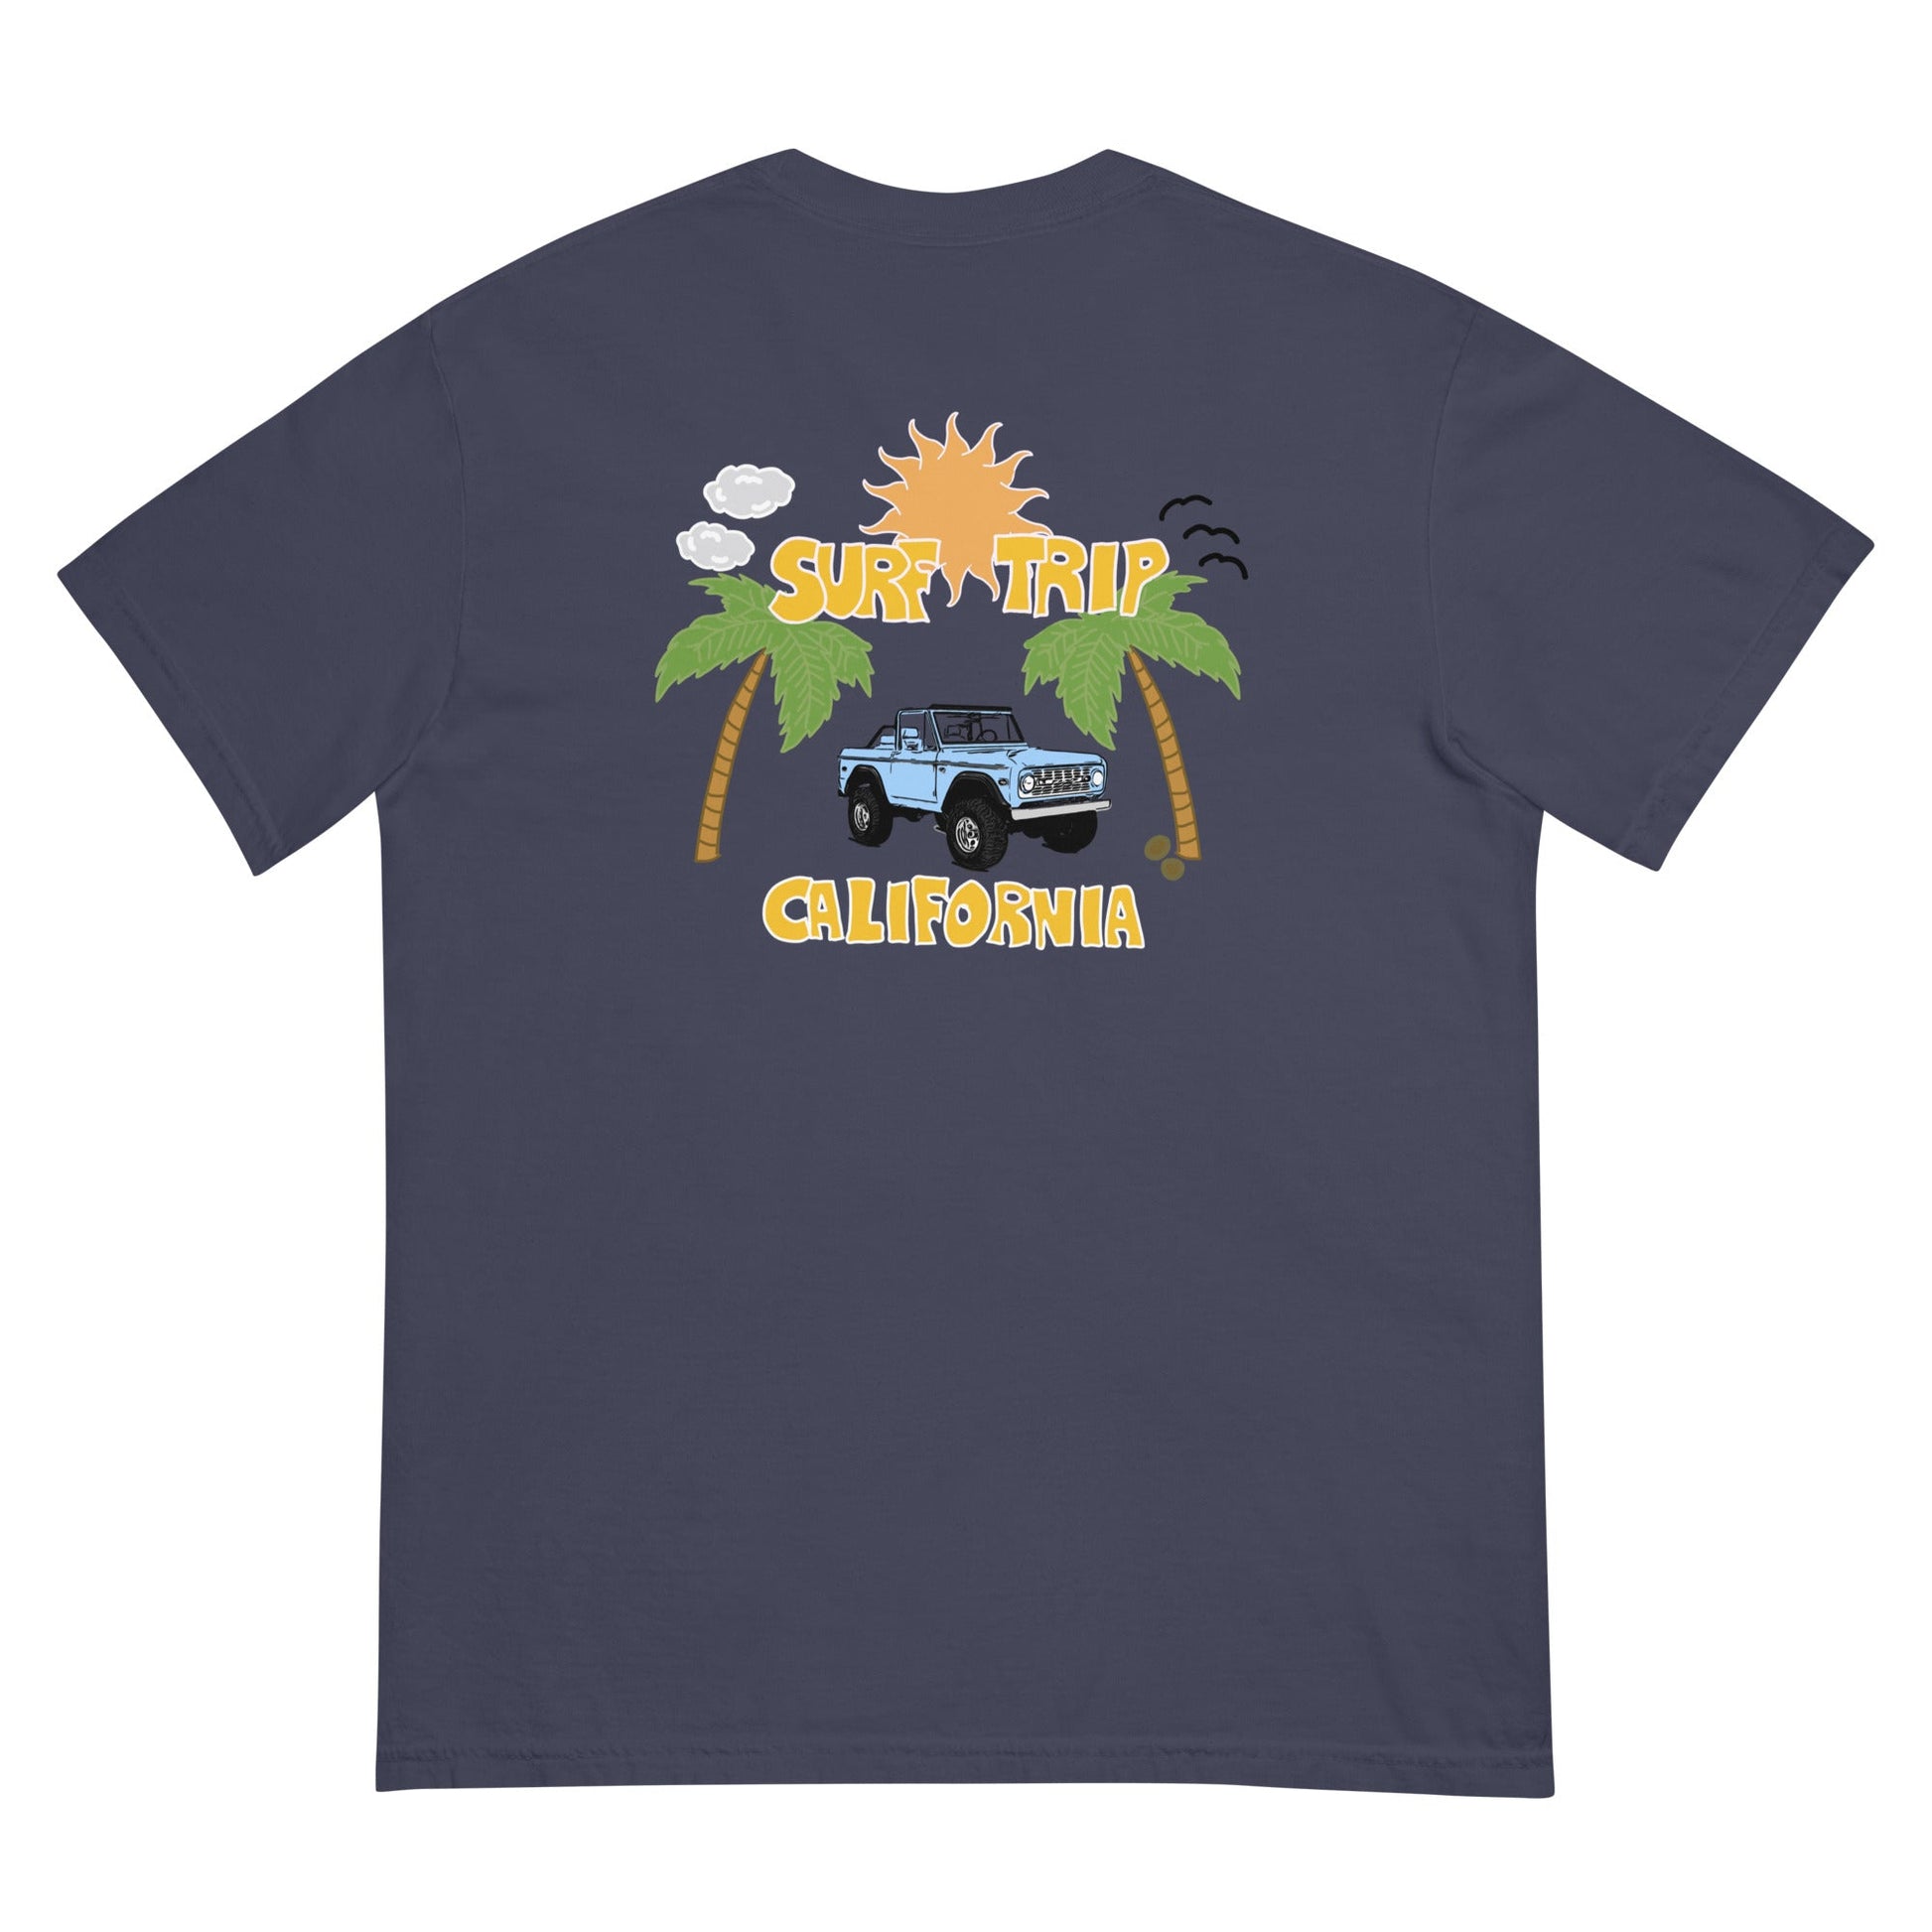 Stoked Tee - Surf Trip Supply